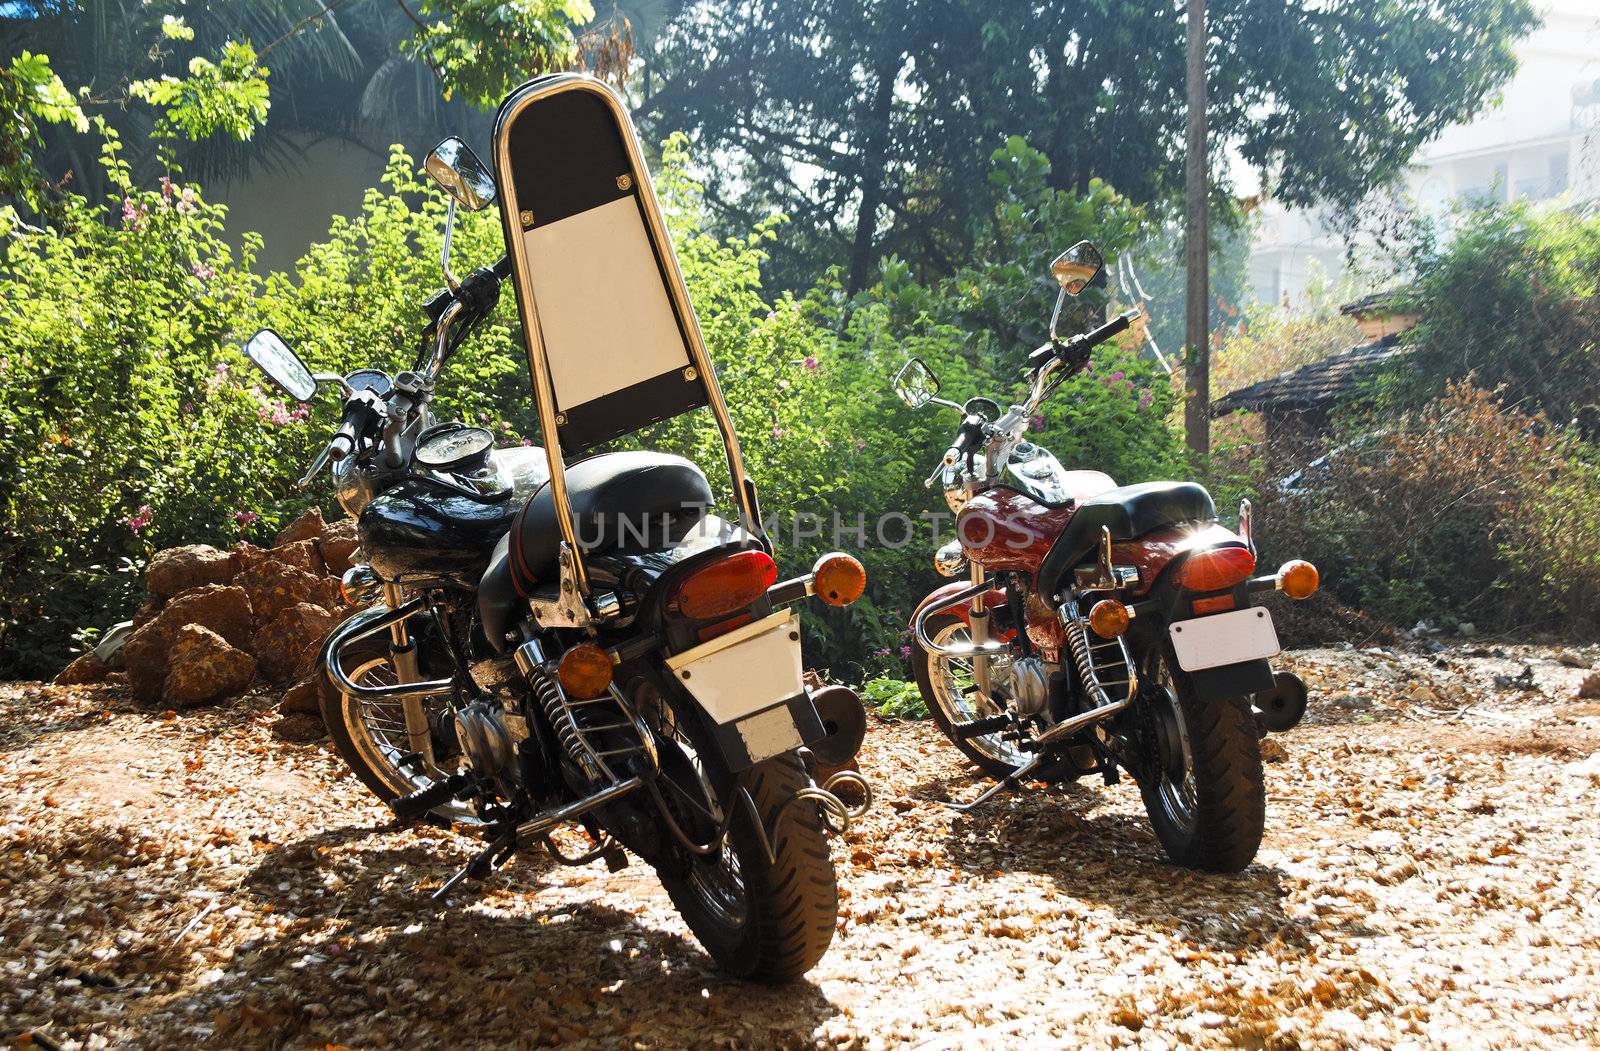 parked up in Goa, India, motor cycles on waste ground under the shade of a tree